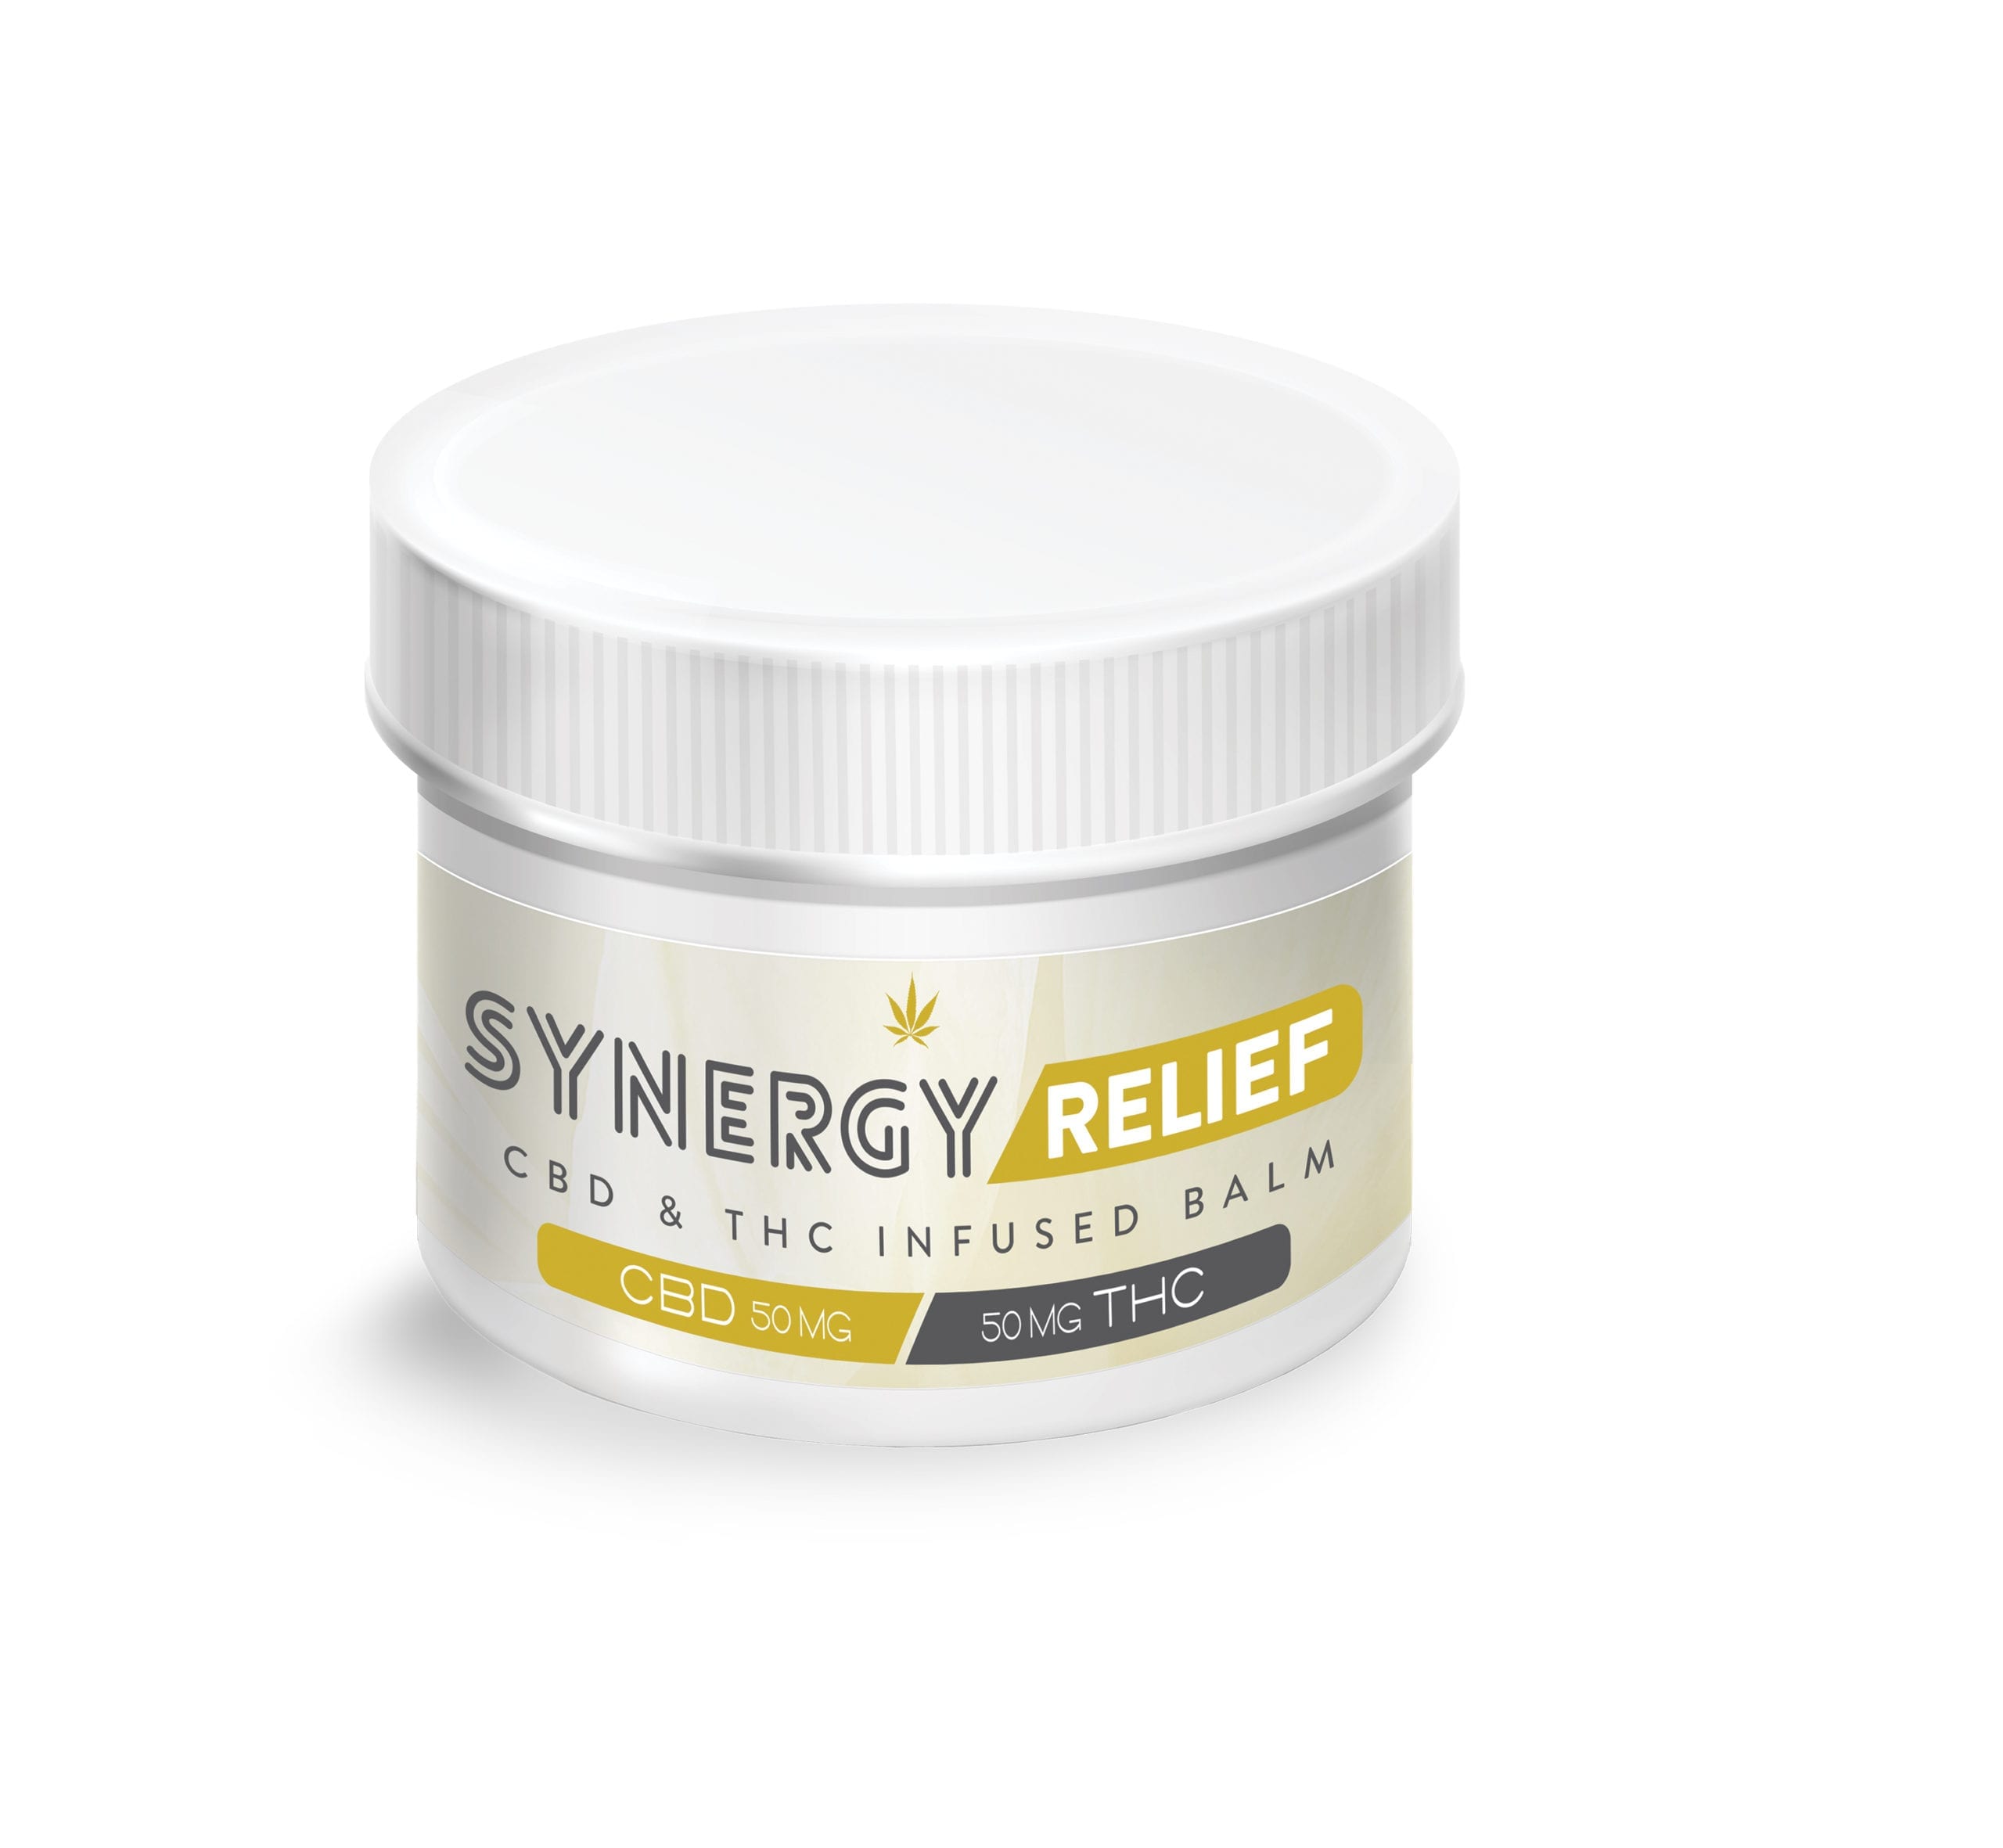 Synergy Relief CBD & THC Infused Balm container featuring new custom label.